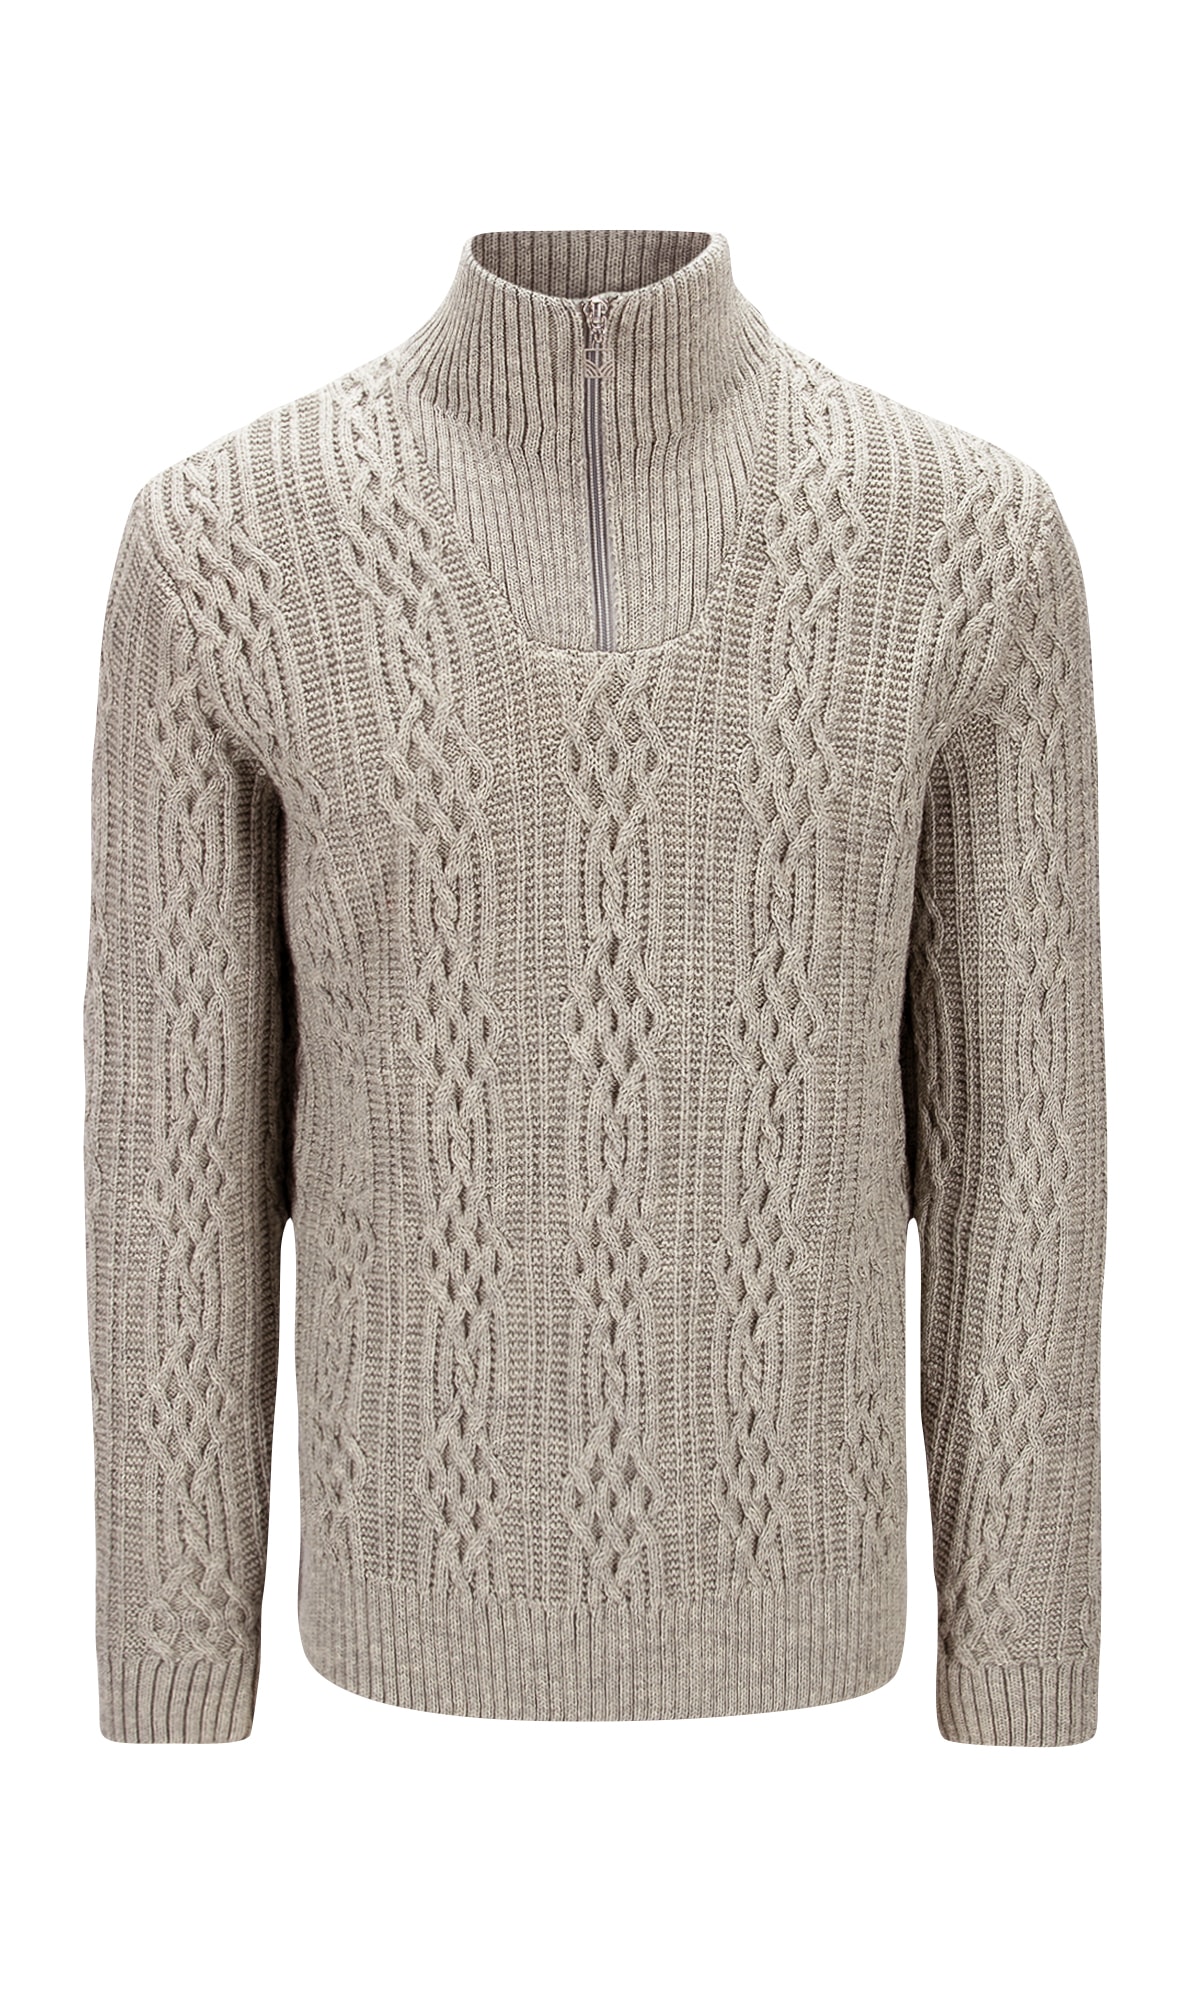 Hoven Knit Sweater - Men - Sand - Dale of Norway - Dale of Norway